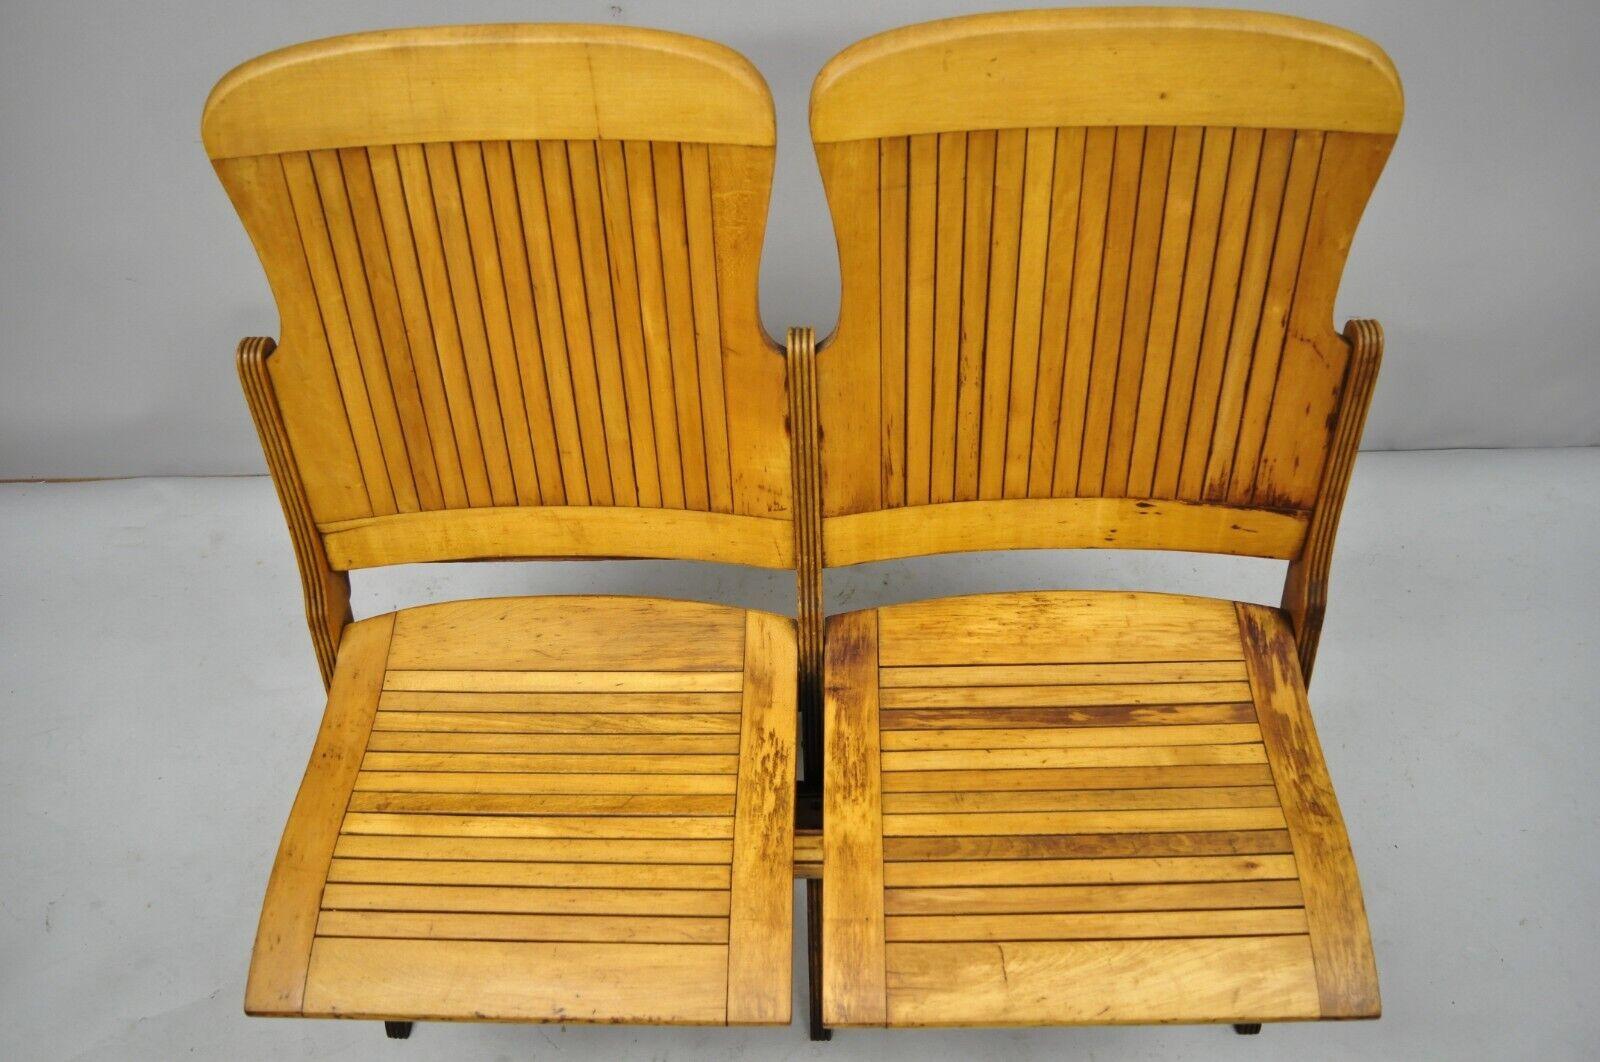 American Antique Vintage Wood Slat Double Folding Seat Theater School Old Pew Chair For Sale